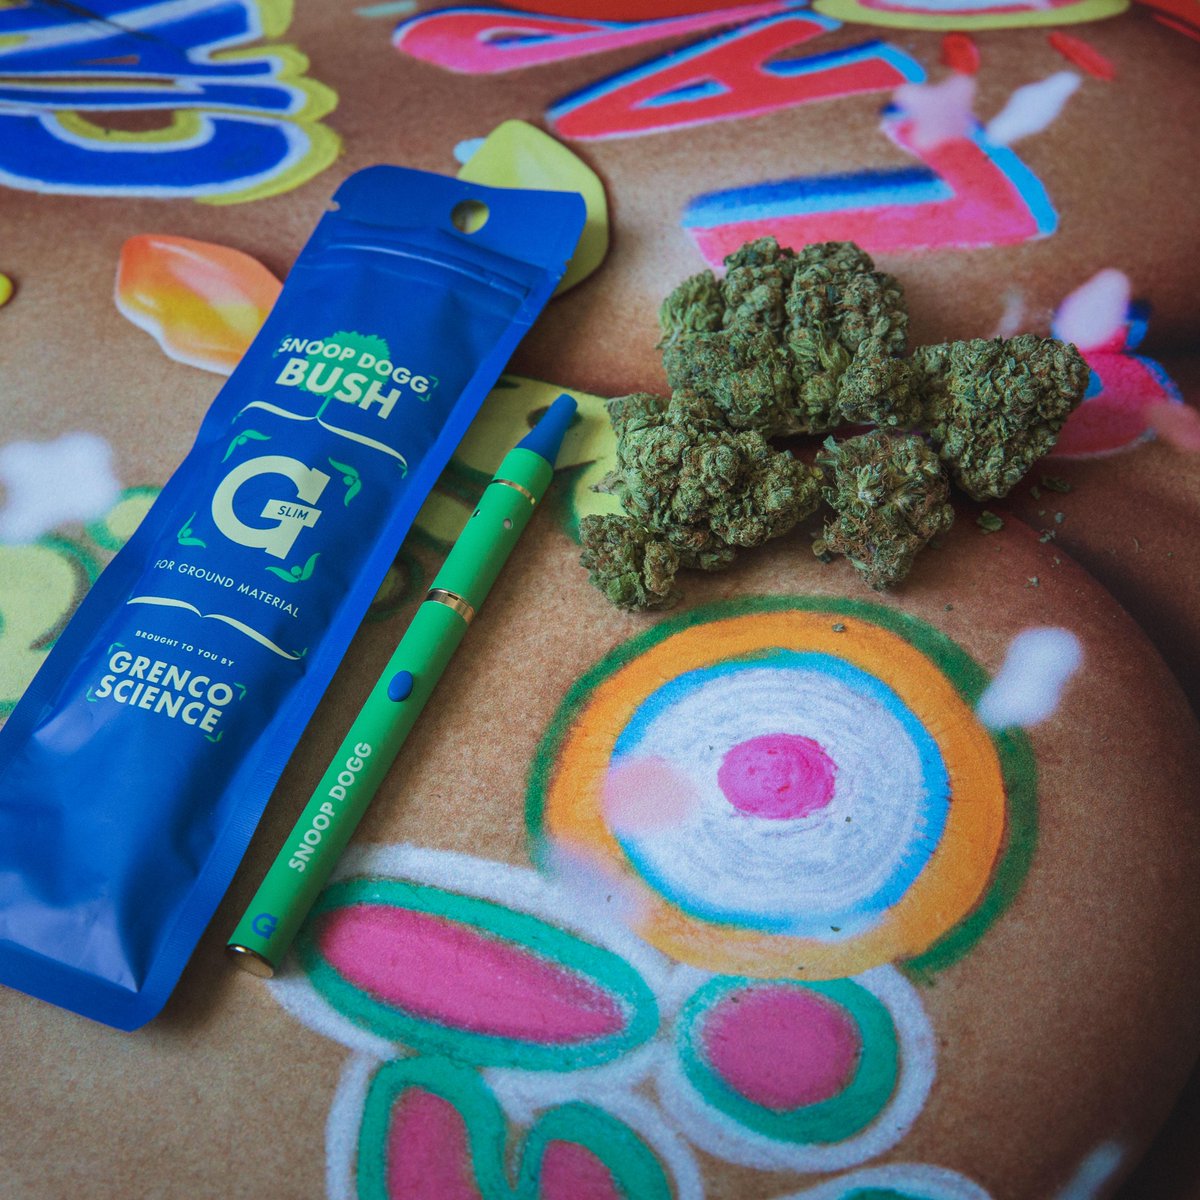 #puffpuffpasstuesdays what u smokn on ? #BUSH @GPen #gslim get urs now on http://t.co/GiJYhF0gXK !! http://t.co/9Du0f8MlUo